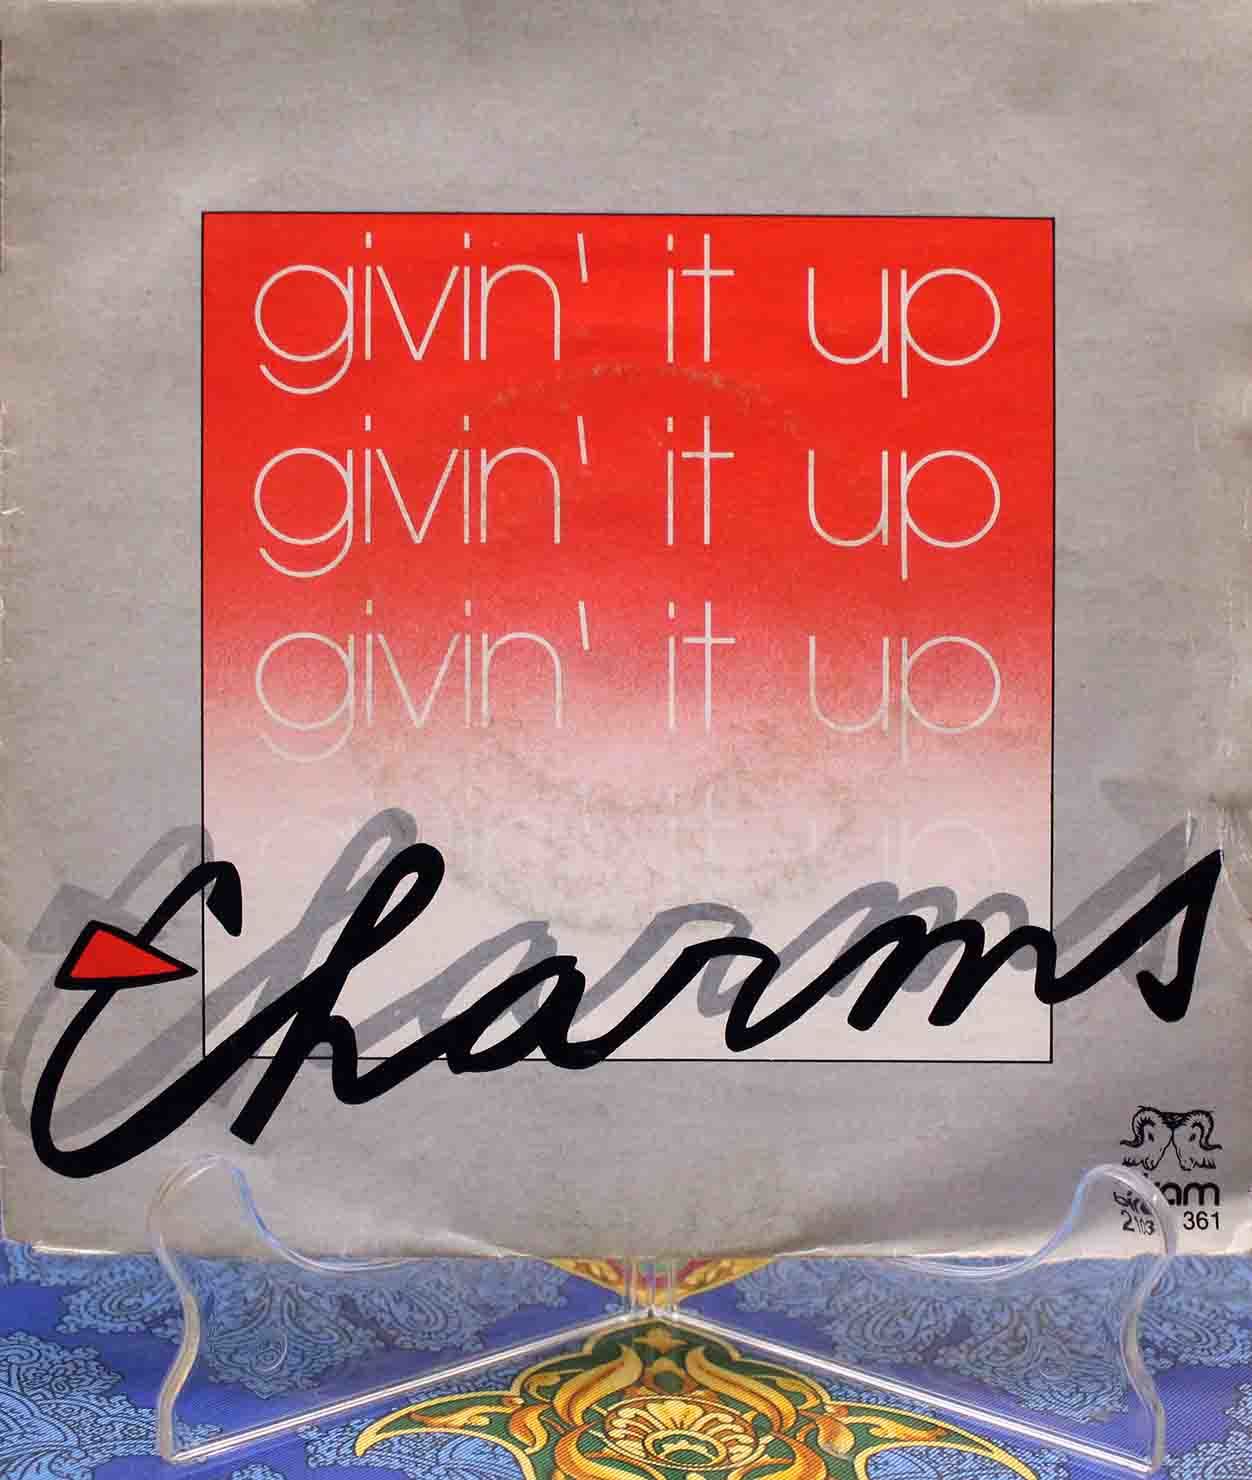 Charms - Givin It Up 01